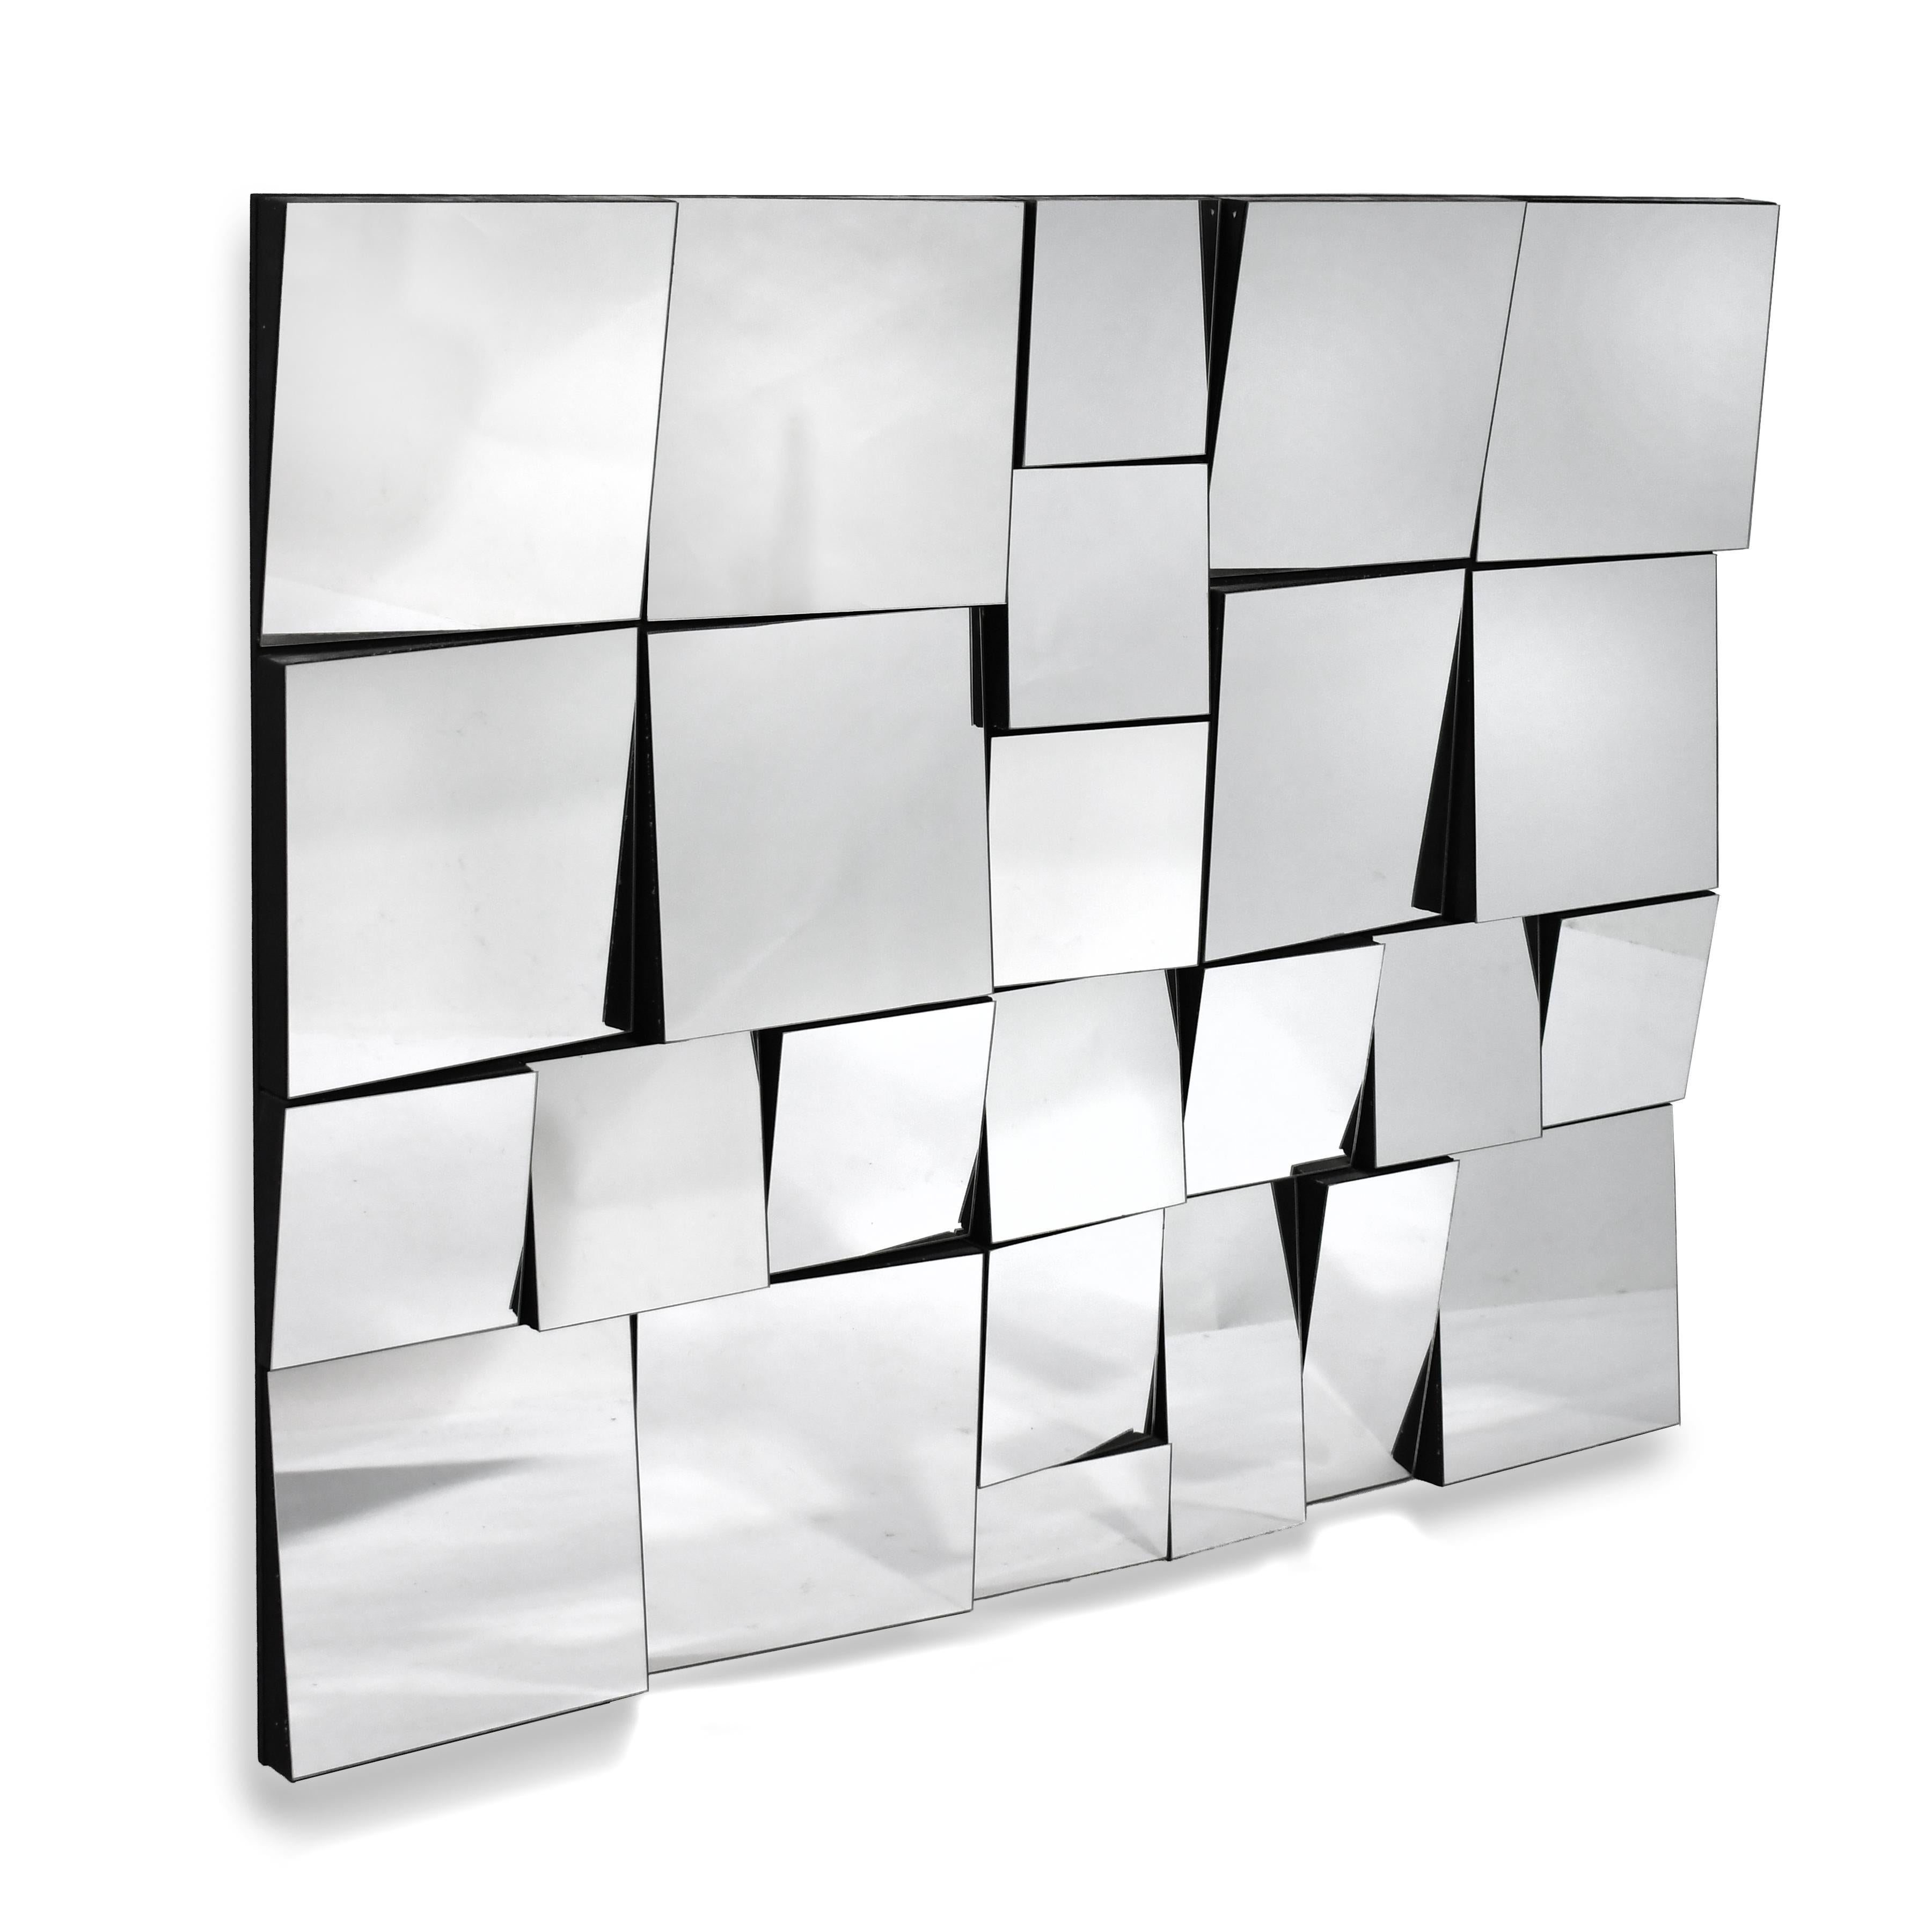 A wonderful vintage example, this arresting wall mirror/ sculpture engages the viewer and activates any wall with its fractured views.

This piece is similar to Neal Small's designs from the same period. Marshall Gross, a graduate of the